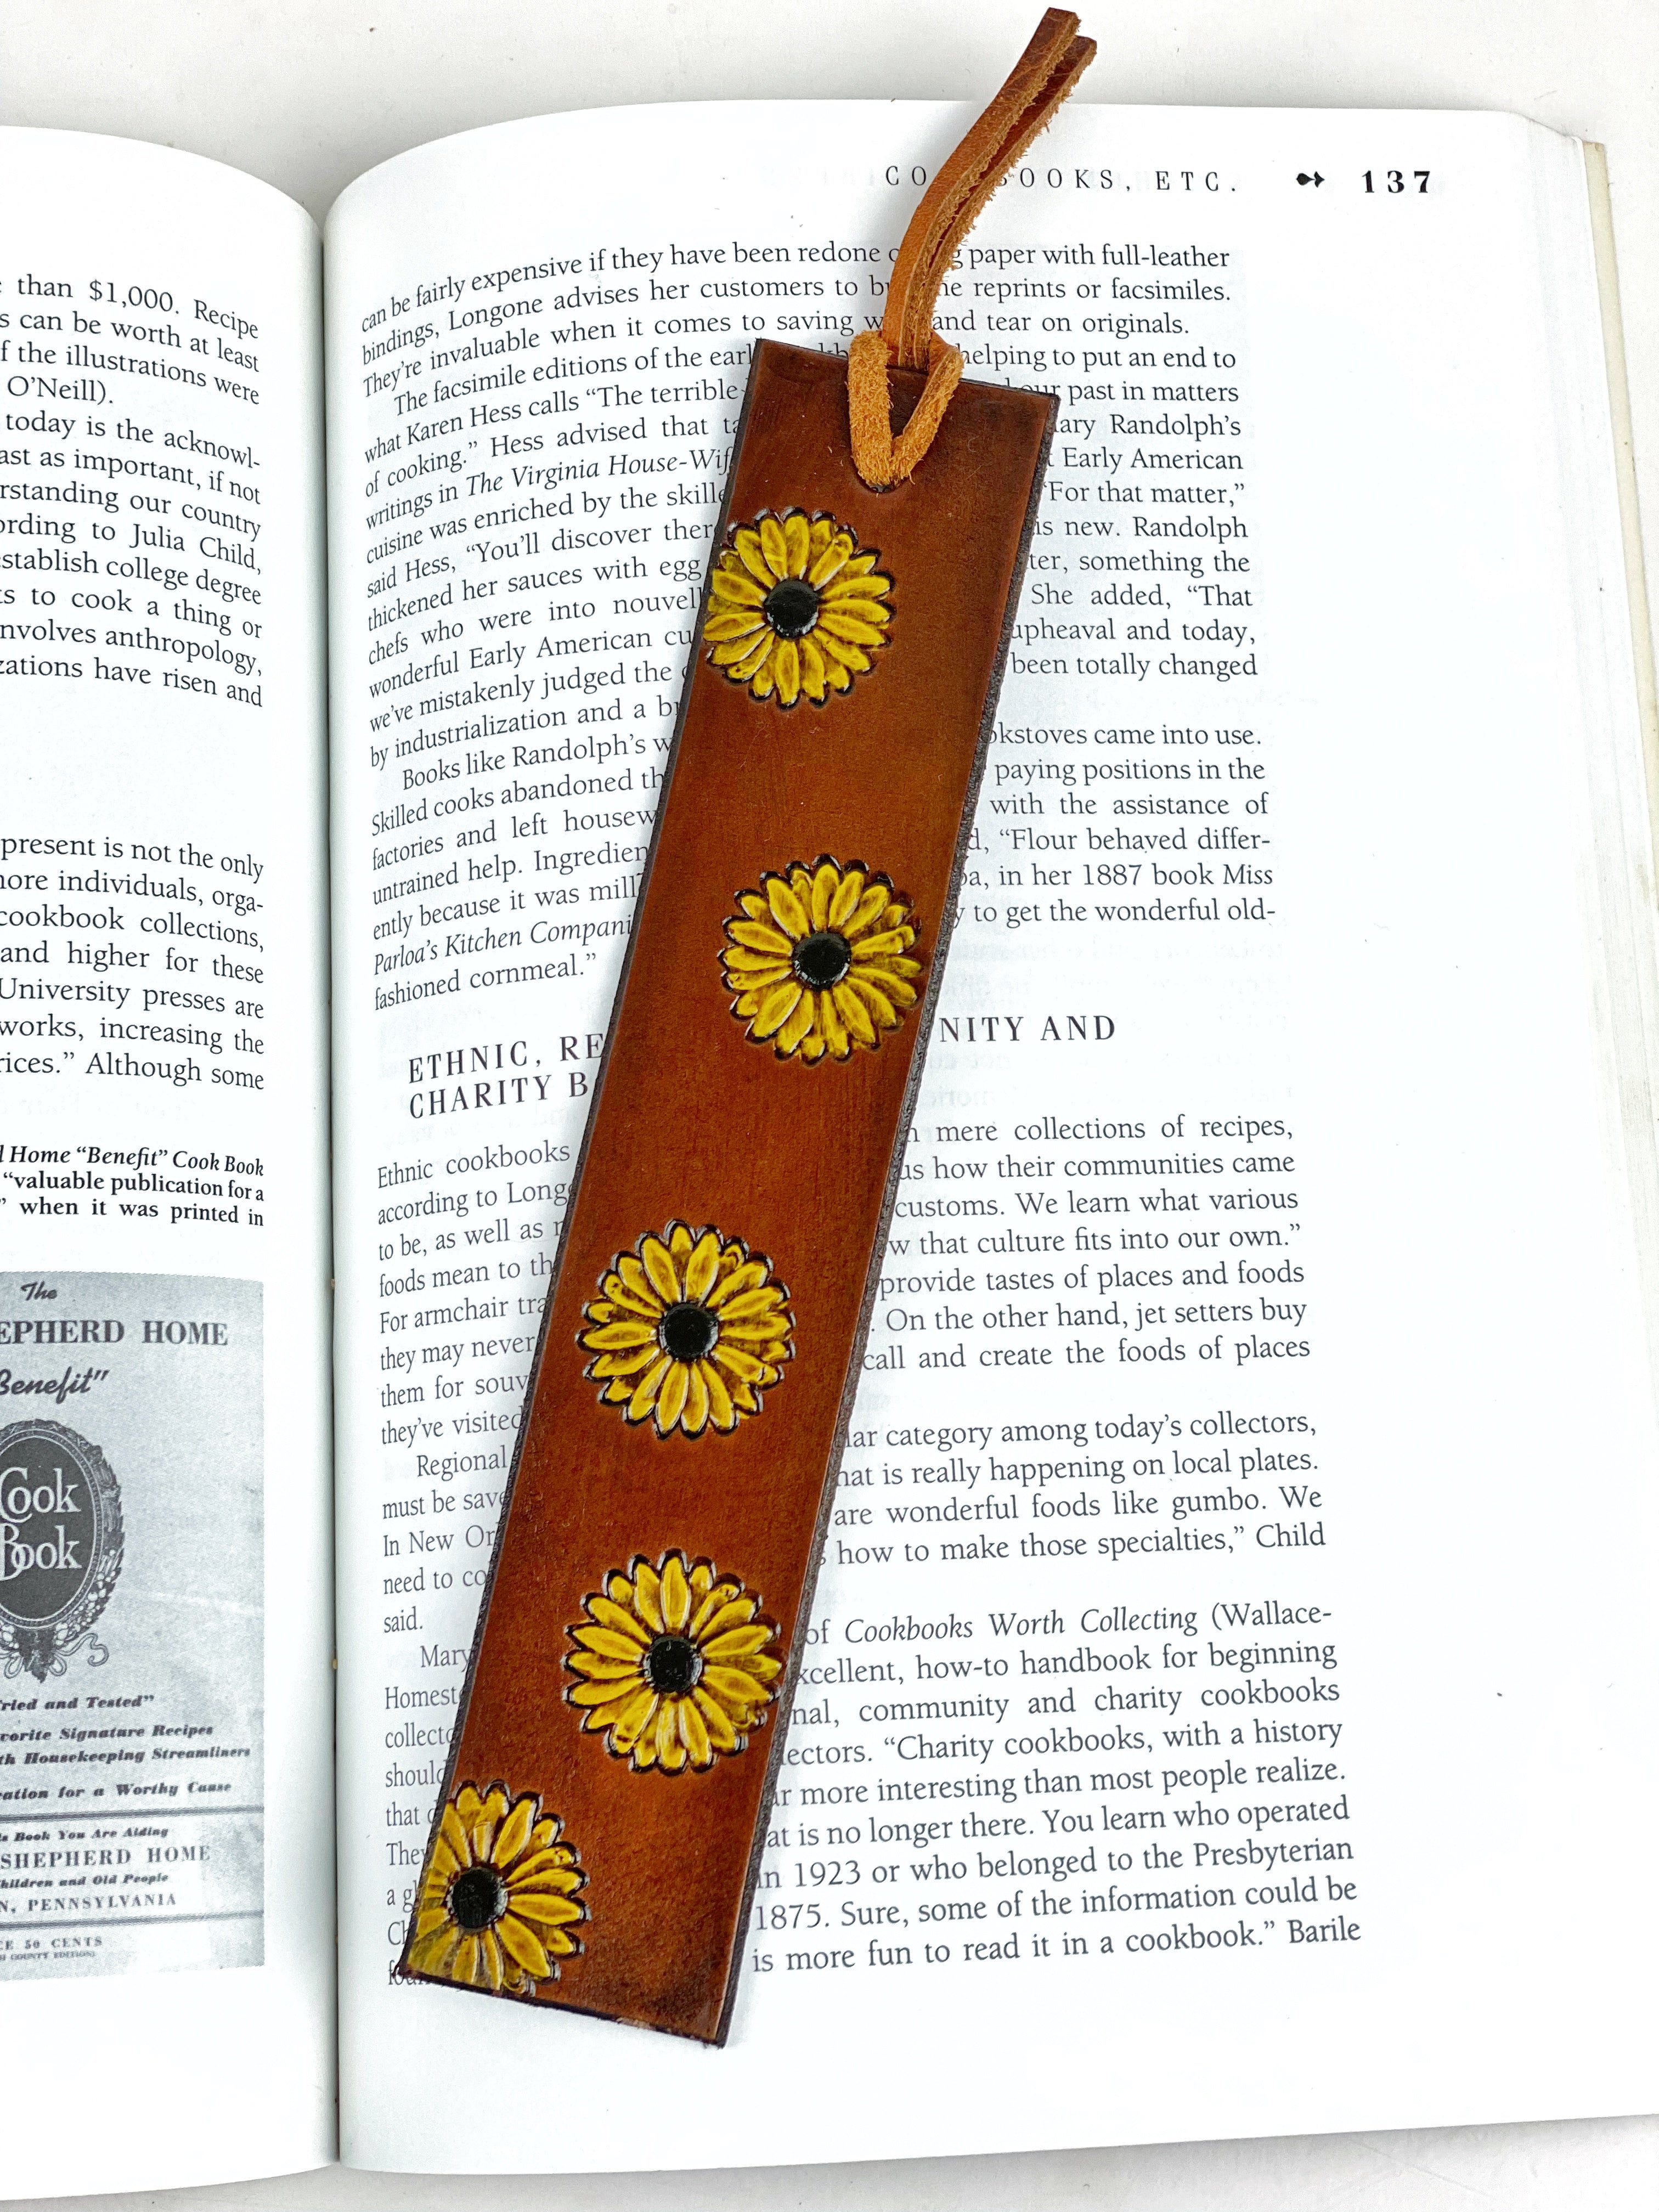 Leather Sunflower Bookmark, Leather Book Marker, Hand Stamped